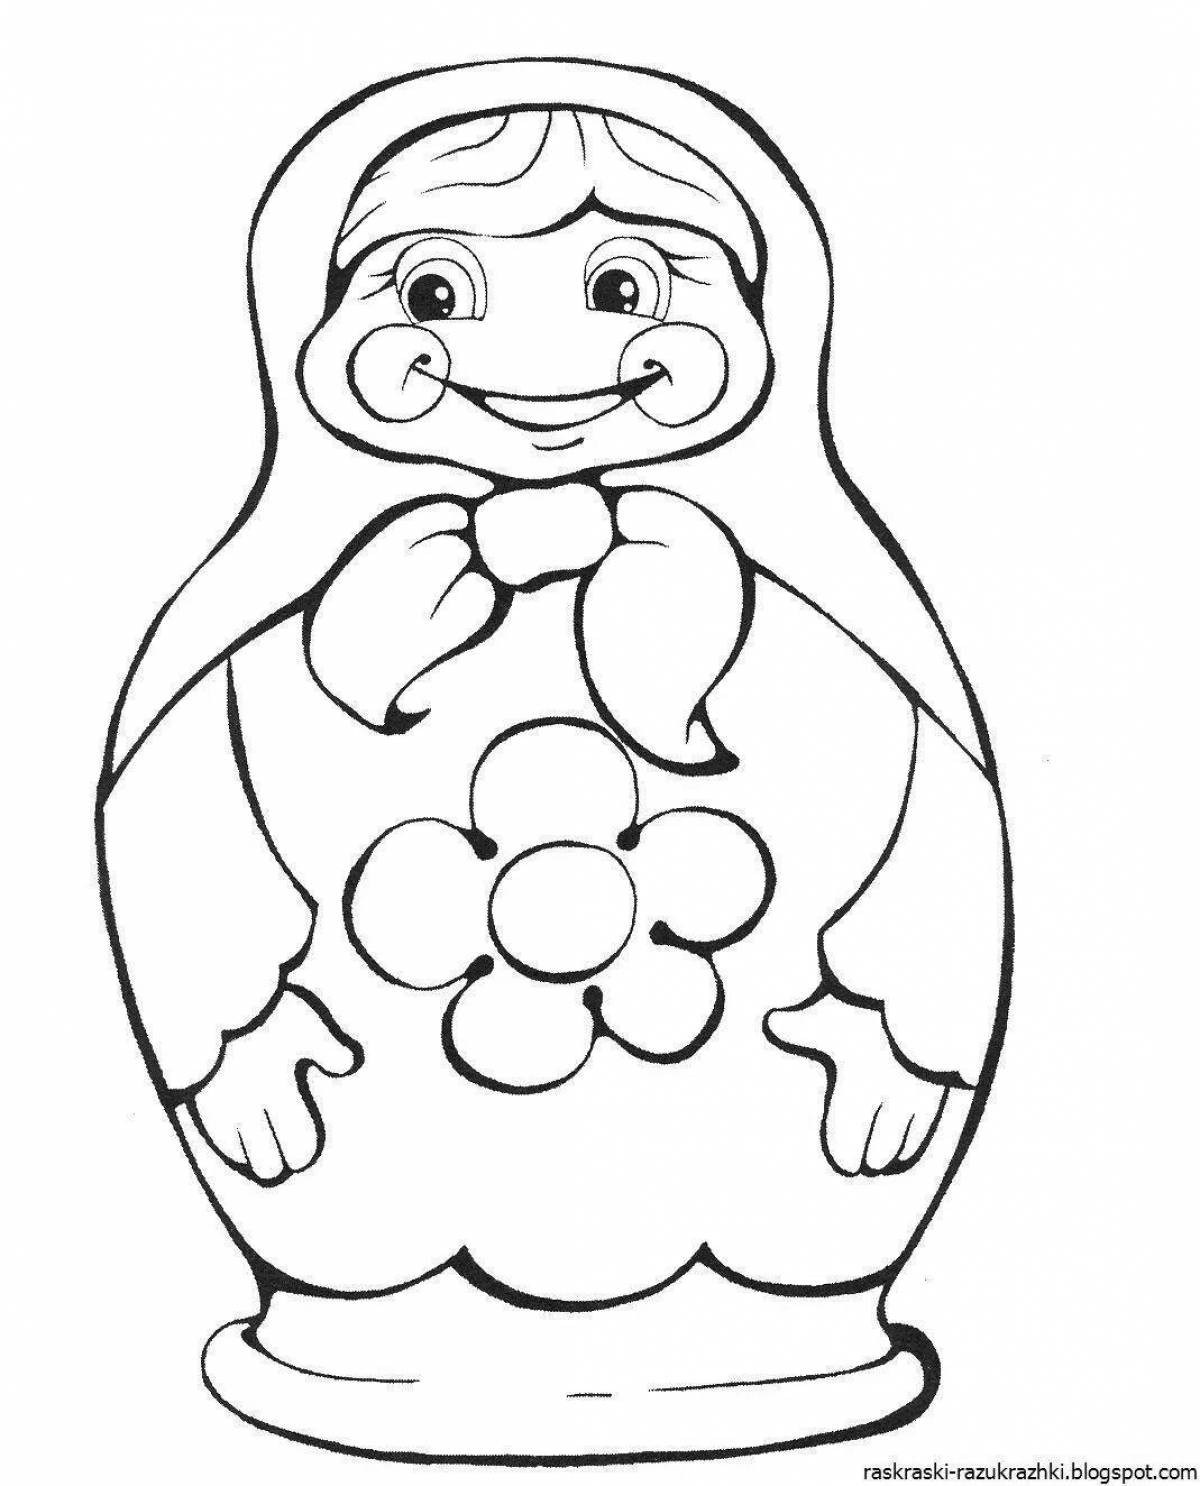 Colored matryoshka coloring book for children 3-4 years old